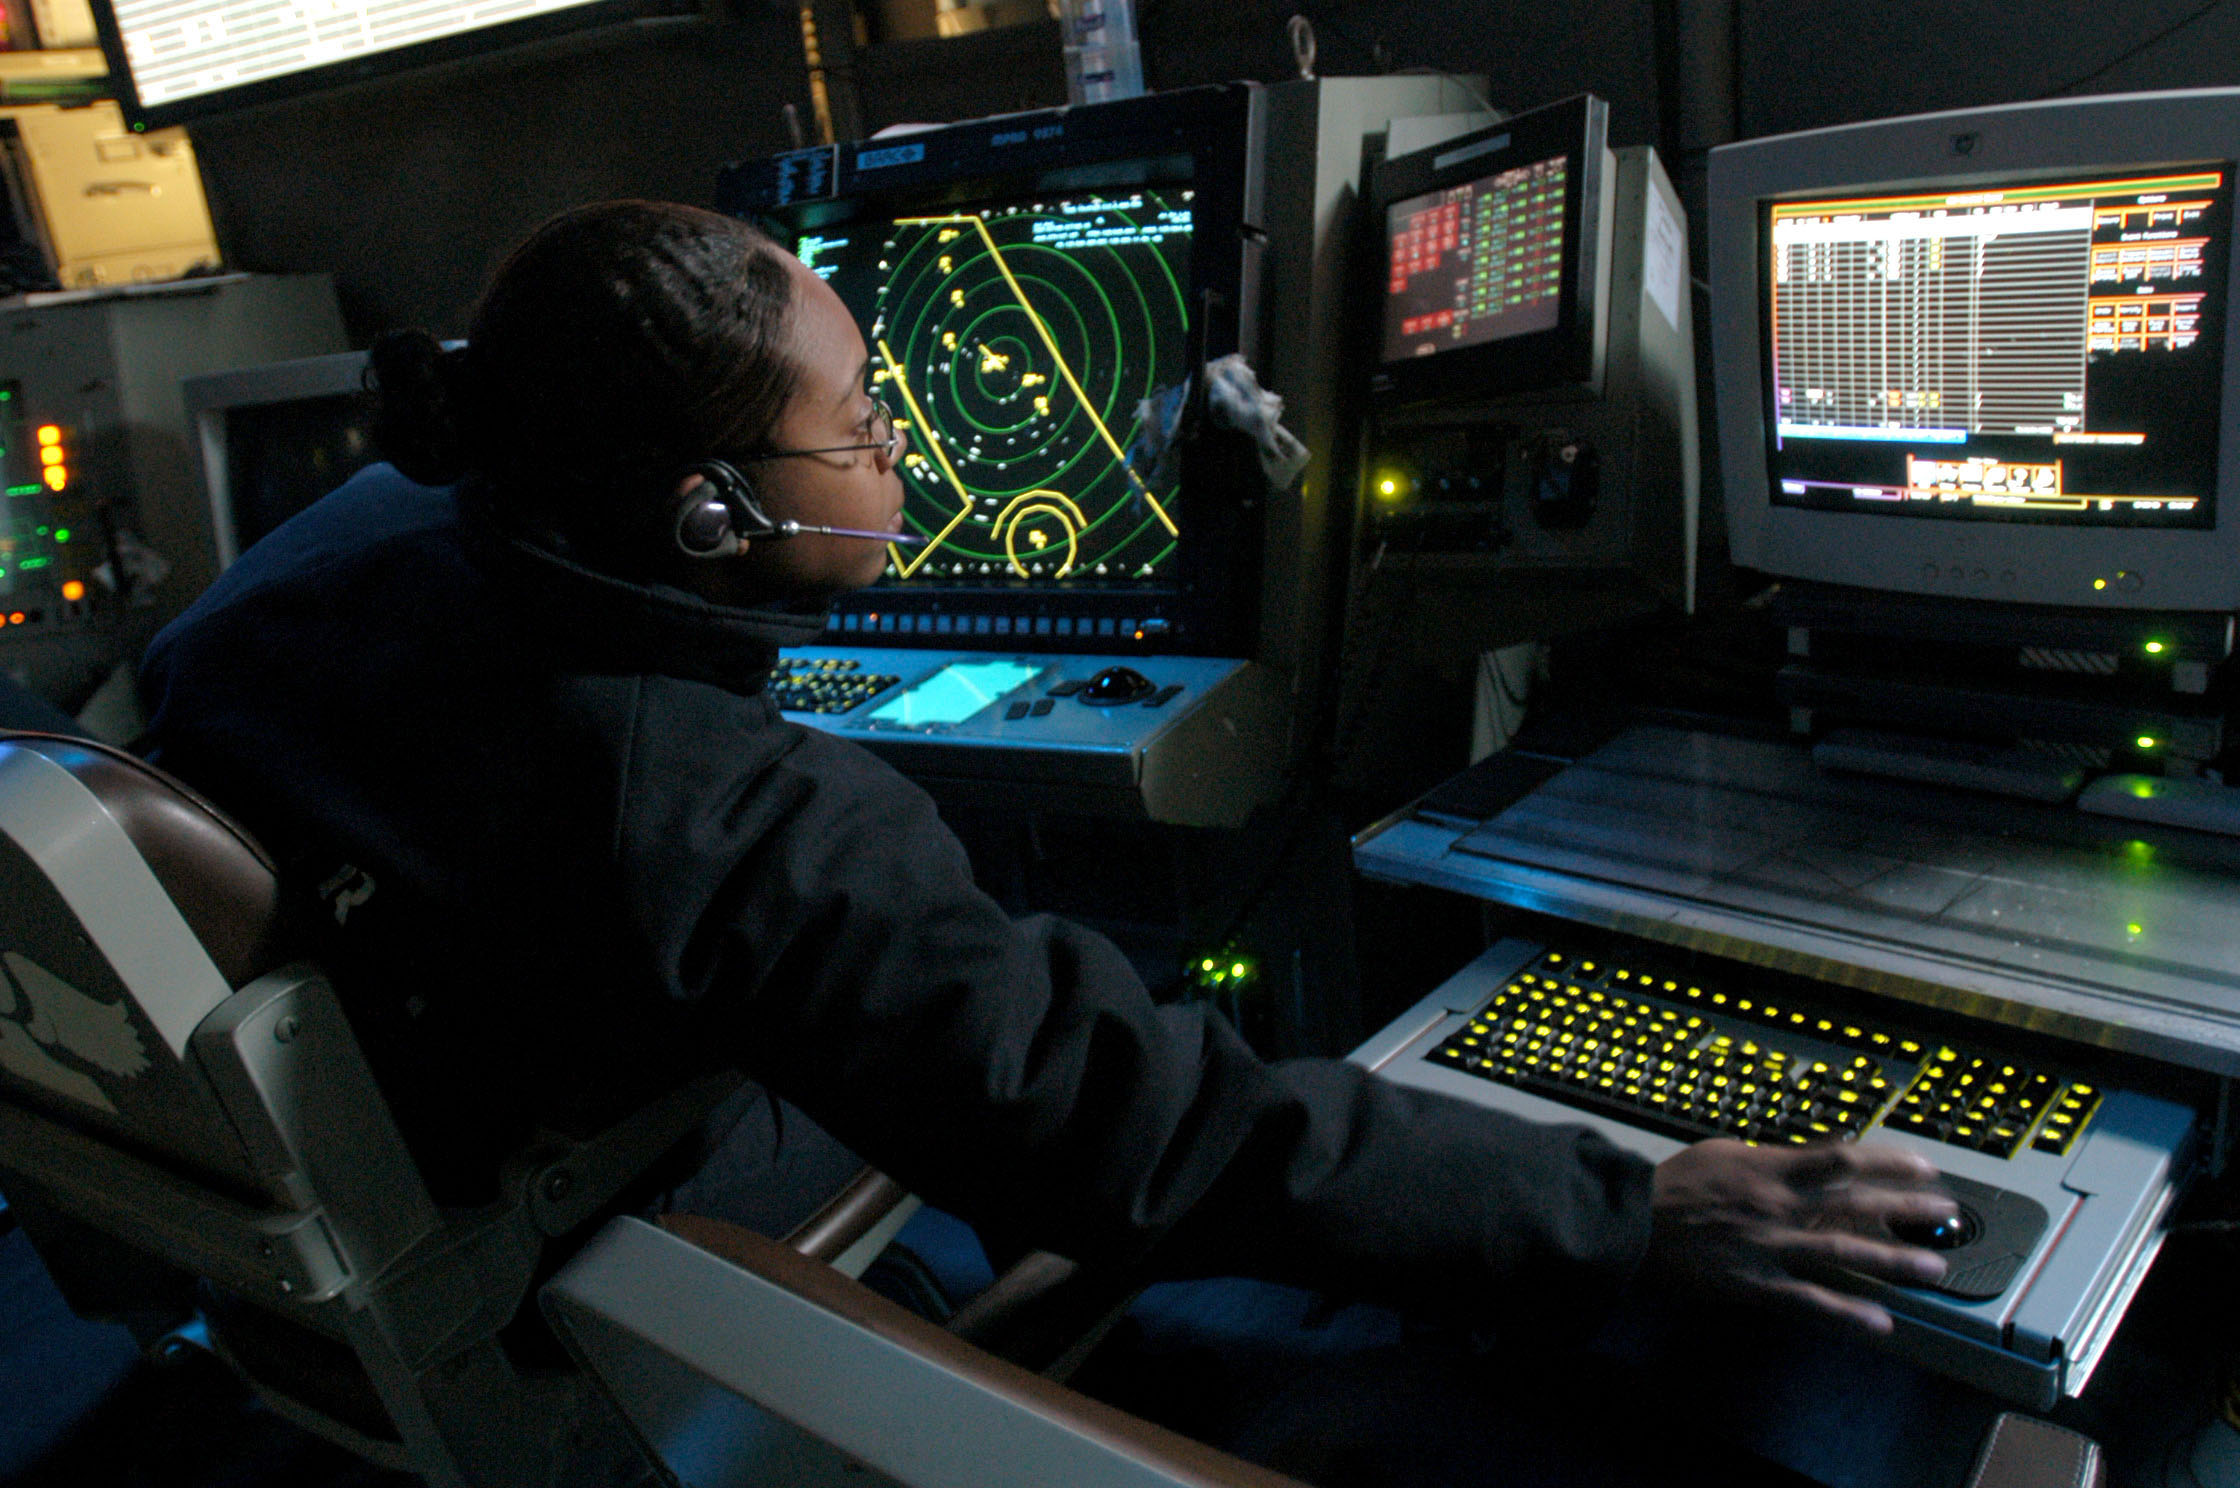 US_Navy_051118-N-9805F-506_Air_Traffic_Controller_2nd_Class_Petty_Officer_Alisa_Barnes_of_Mobile,_Ala.,_monitors_both_the_Approach_A_and_Approach_ISIS_consoles_in_the_Carrier_Air_Traffic_Control_Center_(CATCC)_aboard_USS_Theodo.jpg